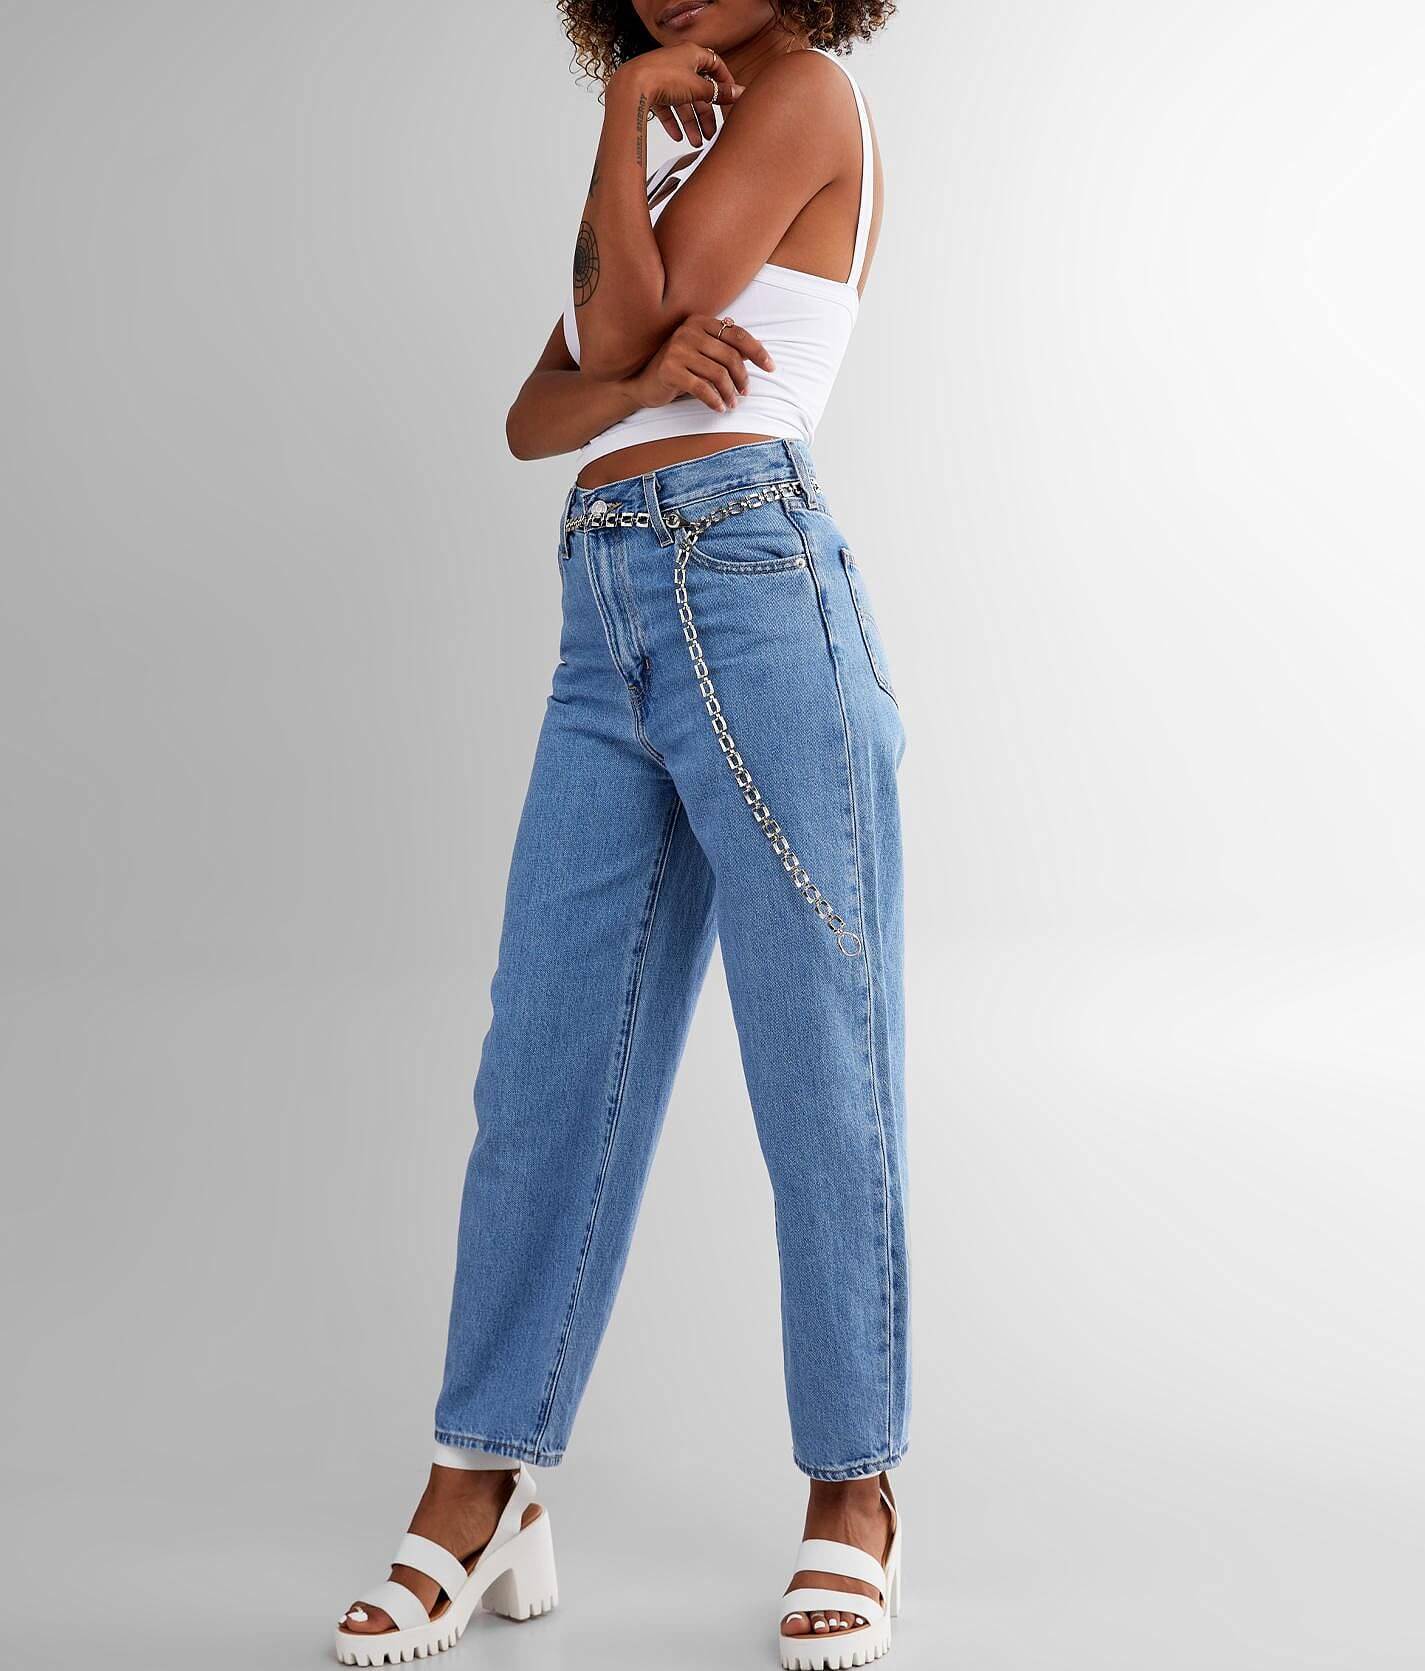 Levi's® Premium Balloon Leg Jean - Women's Jeans in My End Game | Buckle